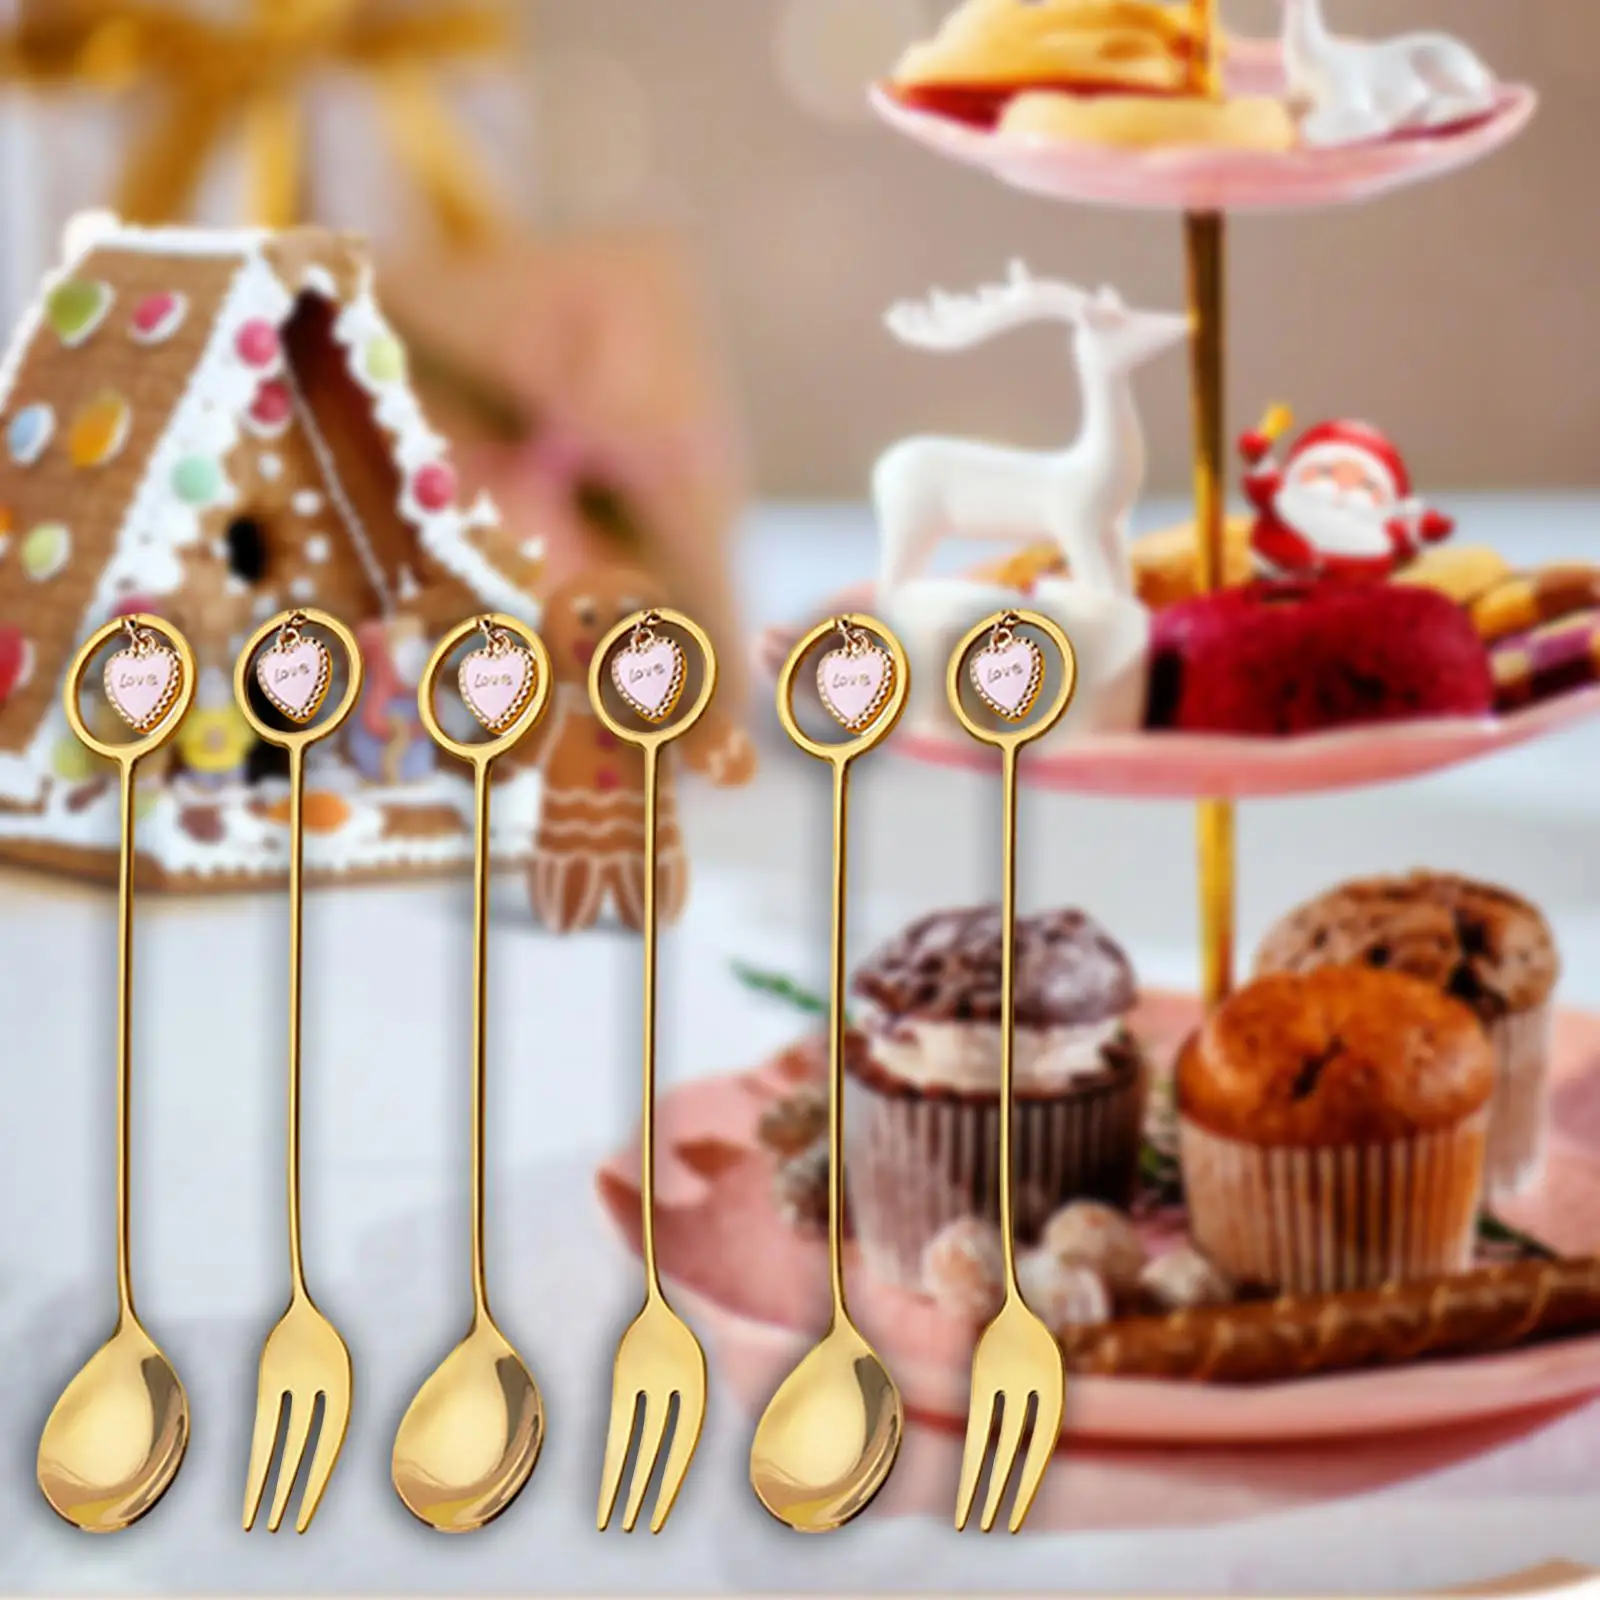 6x Christmas Flatware Coffee Stirring Spoon Christmas Forks and Spoons Set for Wedding Restaurant Daily Use Christmas Kitchen